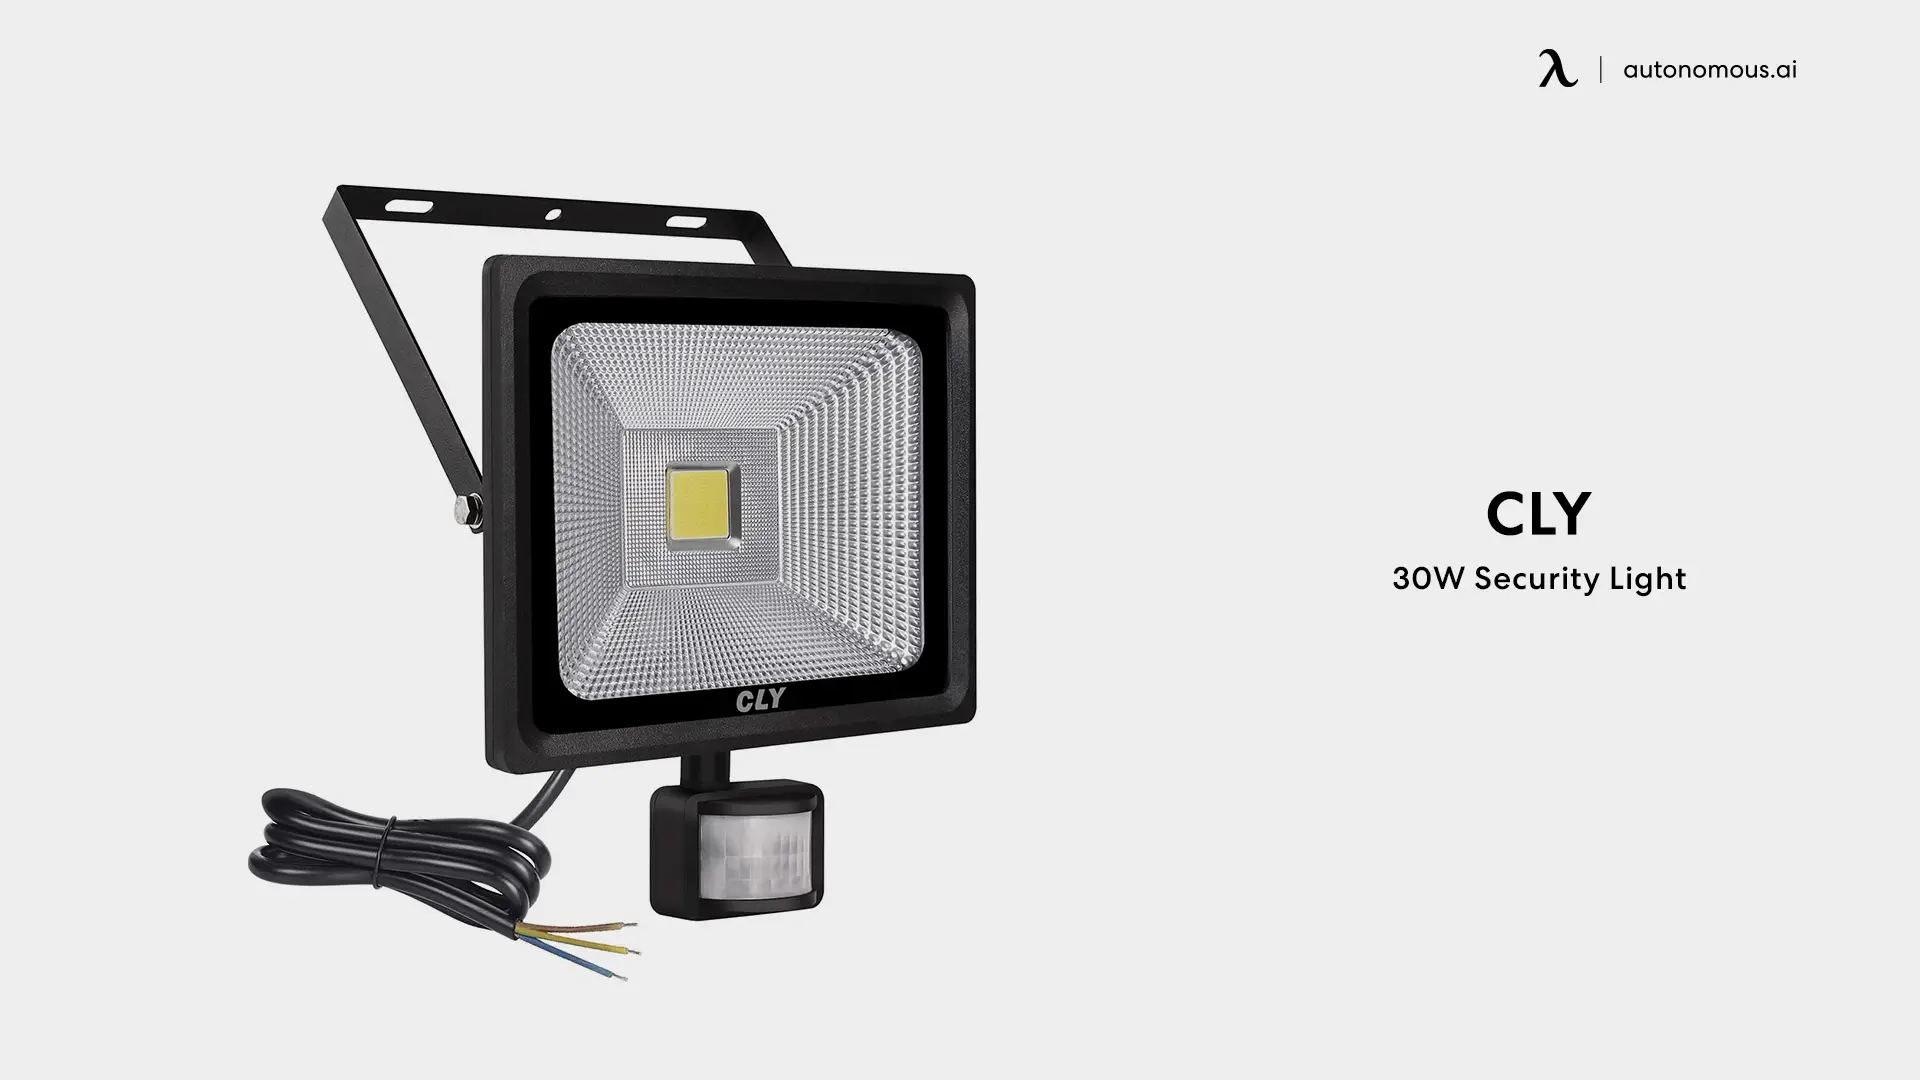 CLY 30W Security Light